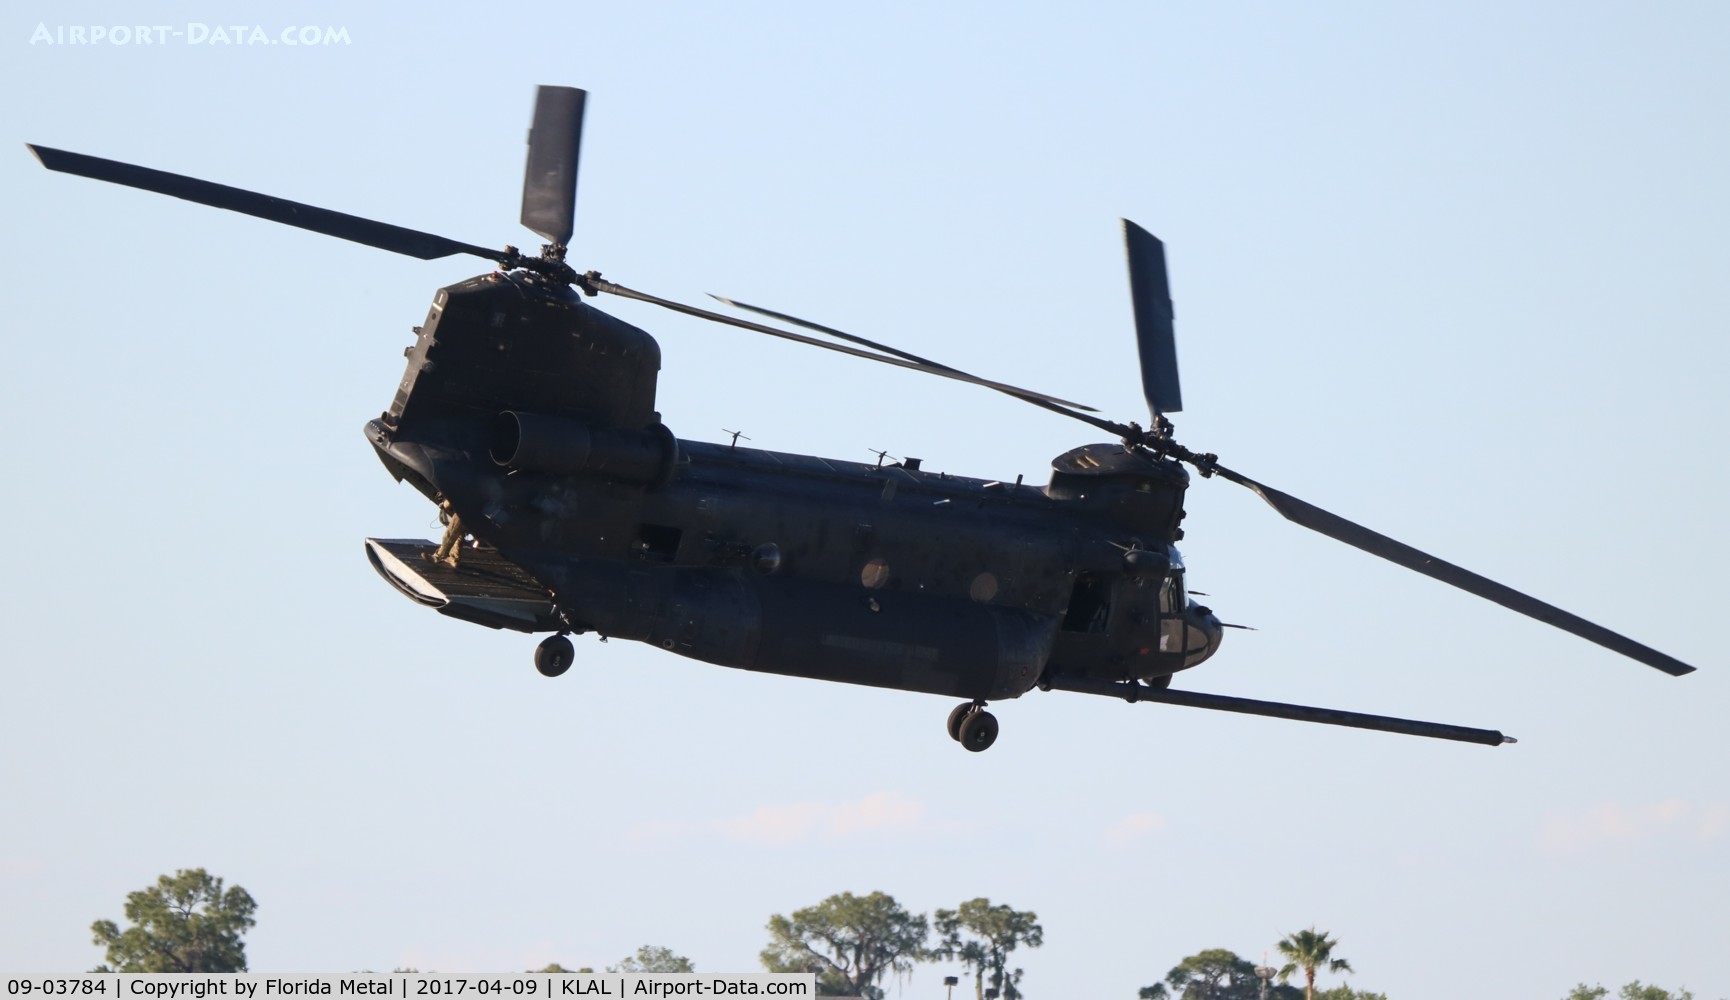 09-03784, 2009 Boeing MH-47G Chinook C/N M3784, US Army MH-47